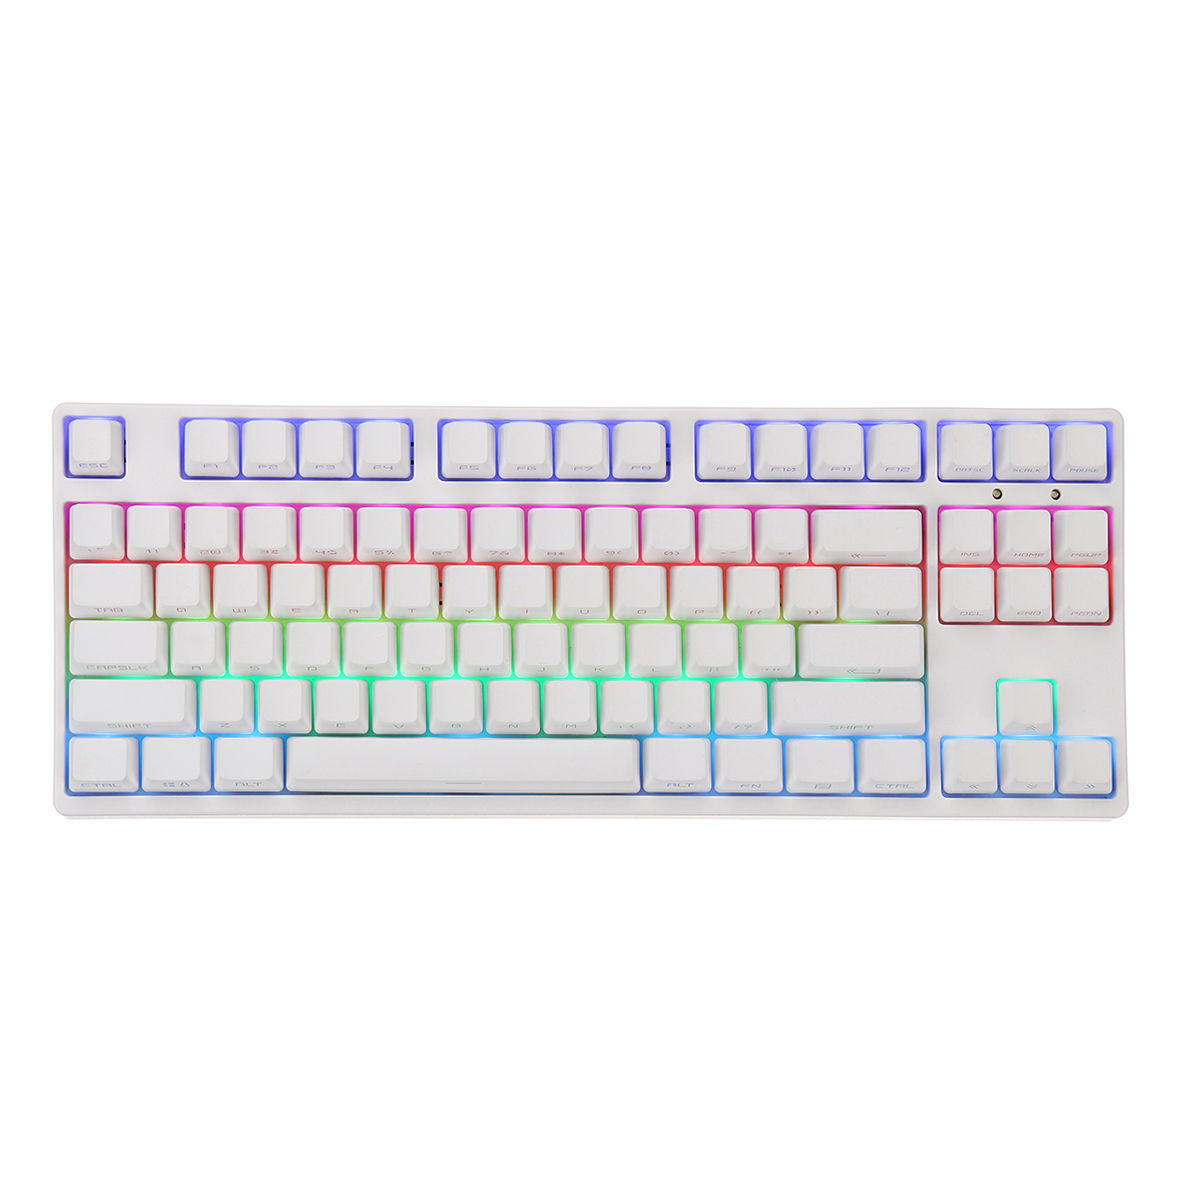 

PLUS2 87 Key NKRO USB Wired RGB Backlit Gateron Switch PBT Double Shot Keycaps Mechanical Gaming Keyboard for E-sport office PC Laptop